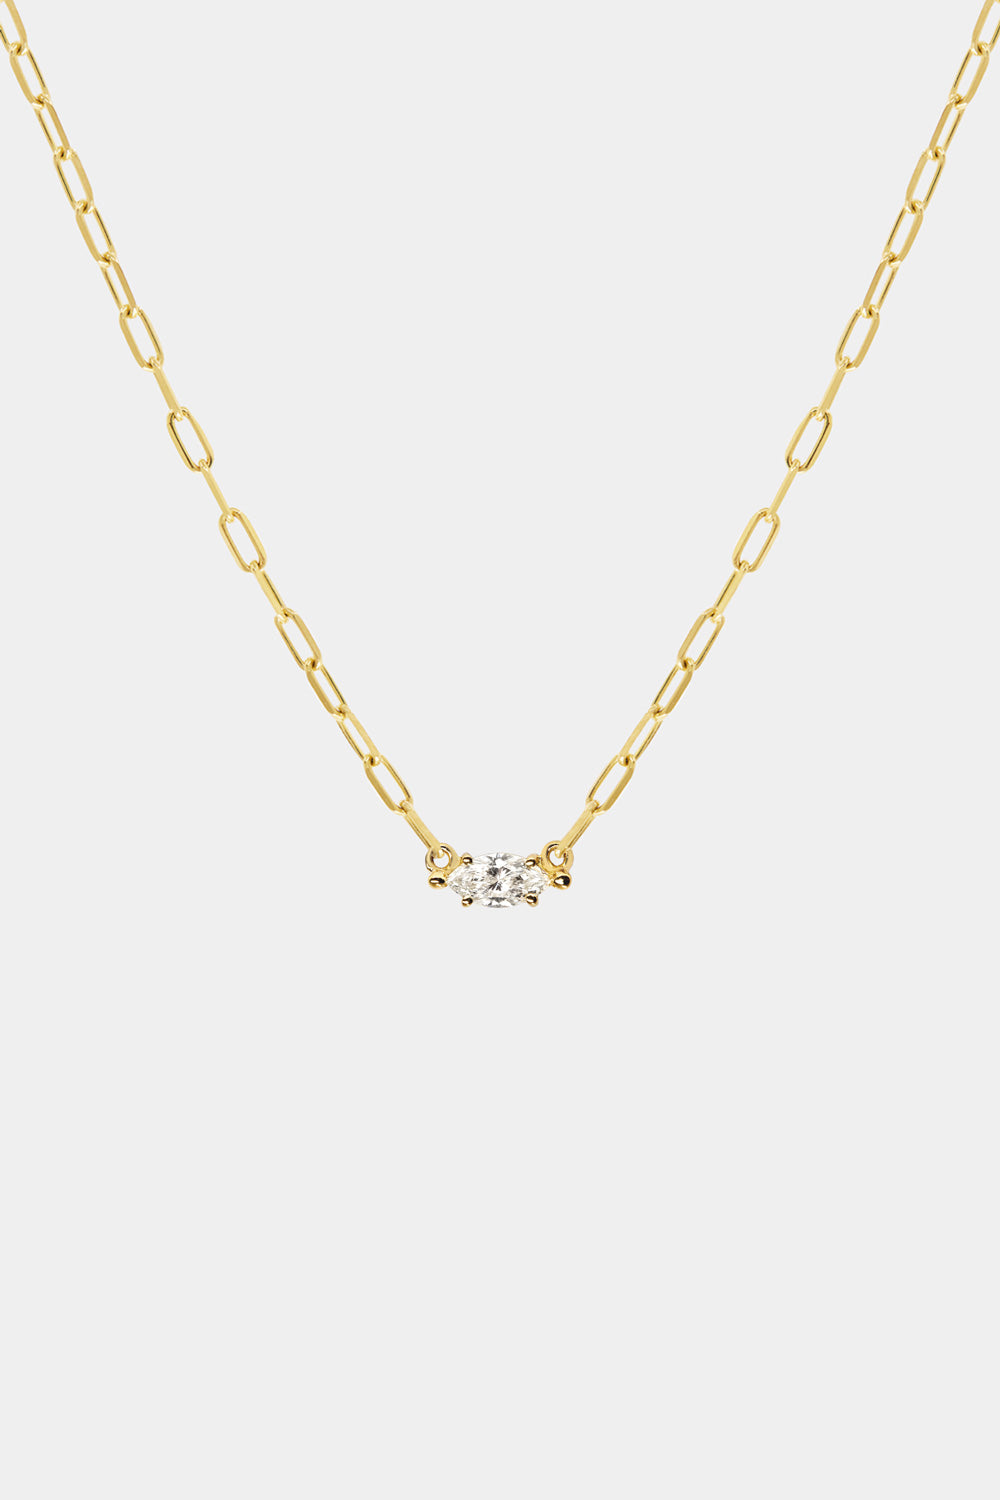 East West Marquise Diamond Necklace | 18K Yellow Gold